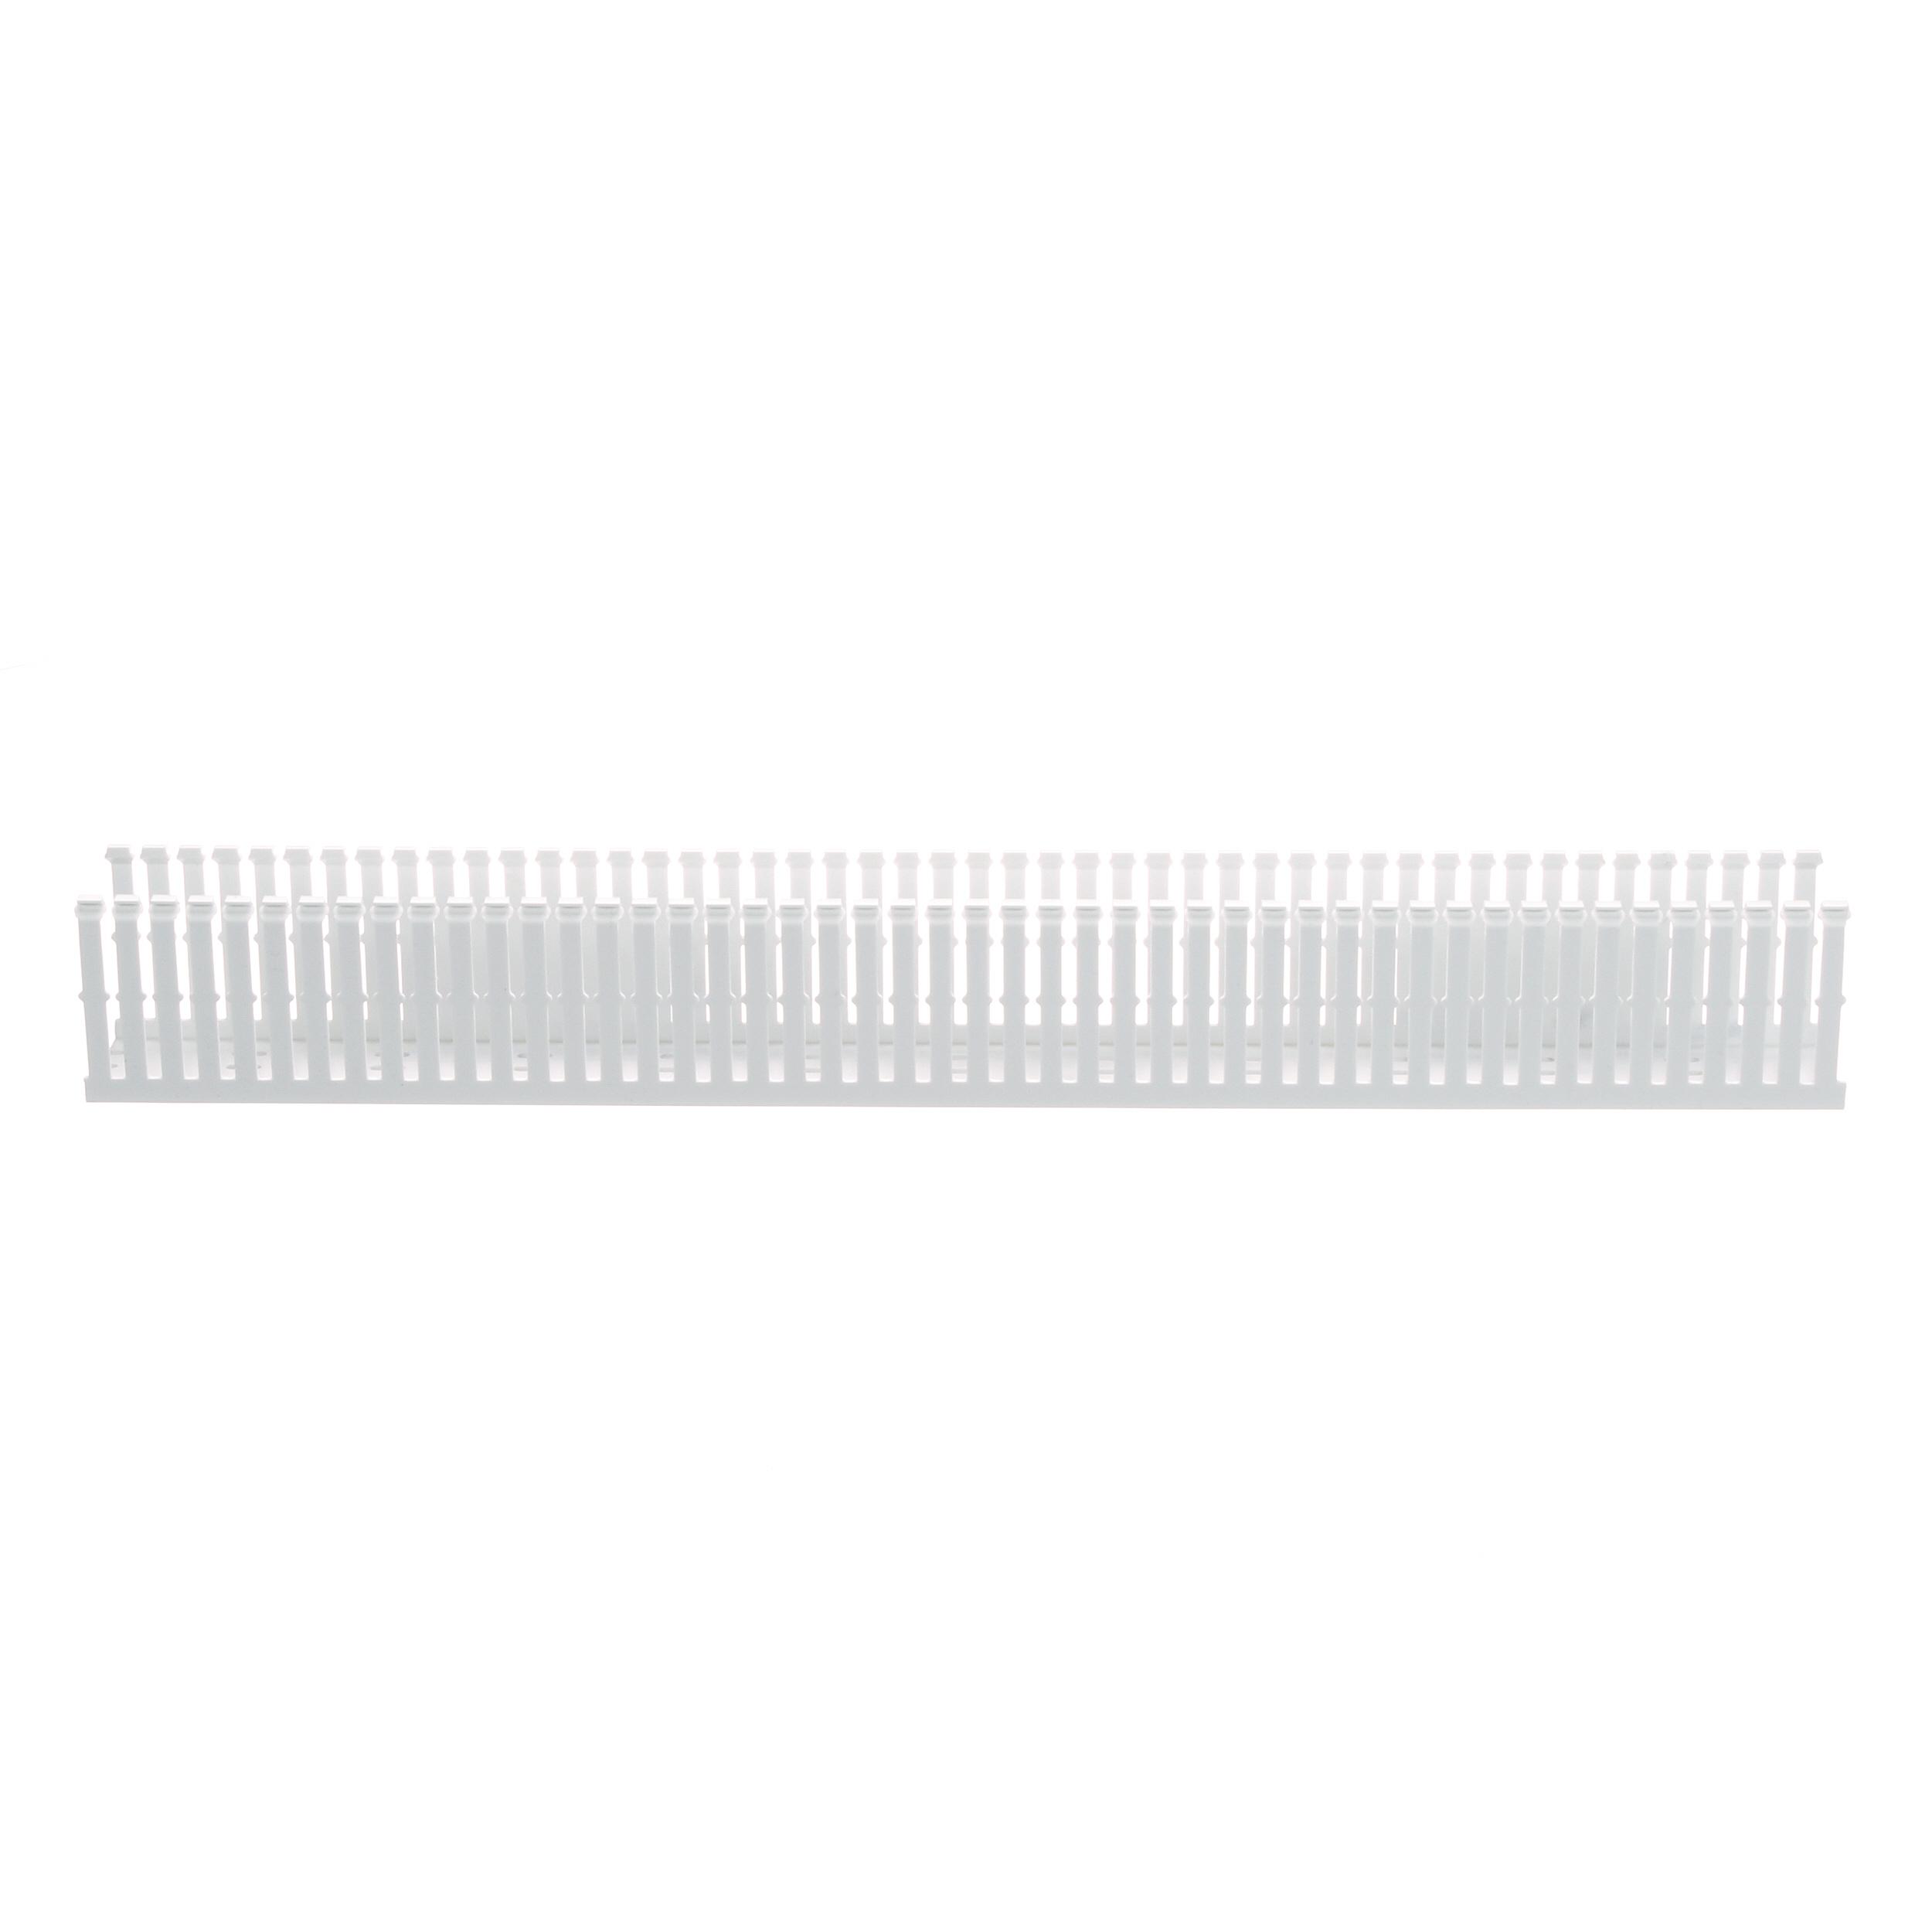 Panduit F2X3WH6 2"X3" WIRING DUCT TYPE FSLOTTED SIDEWALL WHITE6FT LENGTHS ROHS